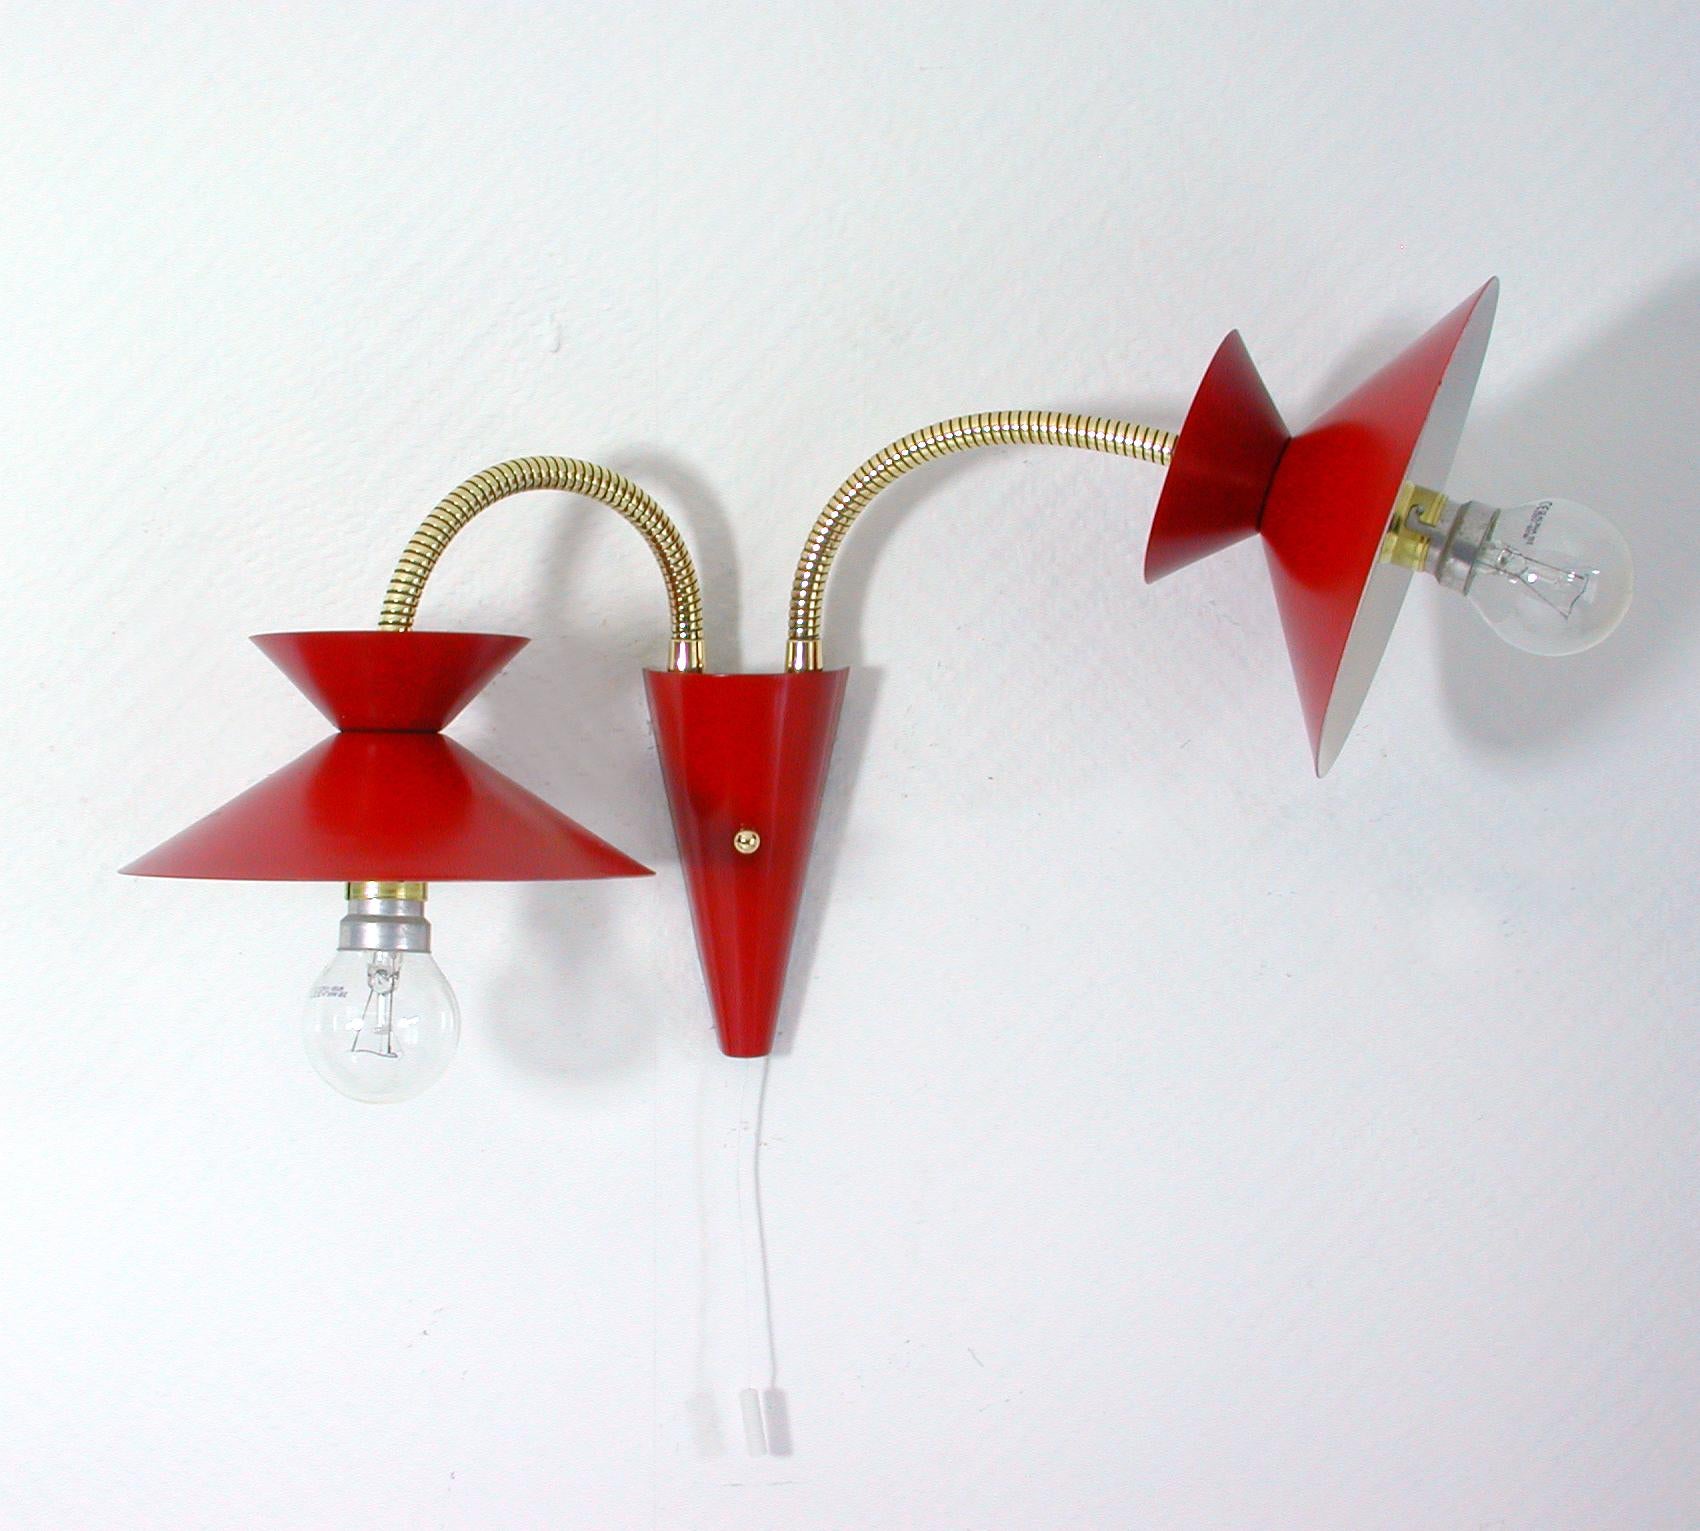 This elegant 1950s midcentury wall lamp / light fixture was designed and manufactured in France in the style of Pierre Guariche.

The wall light has got two red diabolo-shaped lampshades and brass gooseneck lamp arms. The lamp has been rewired.